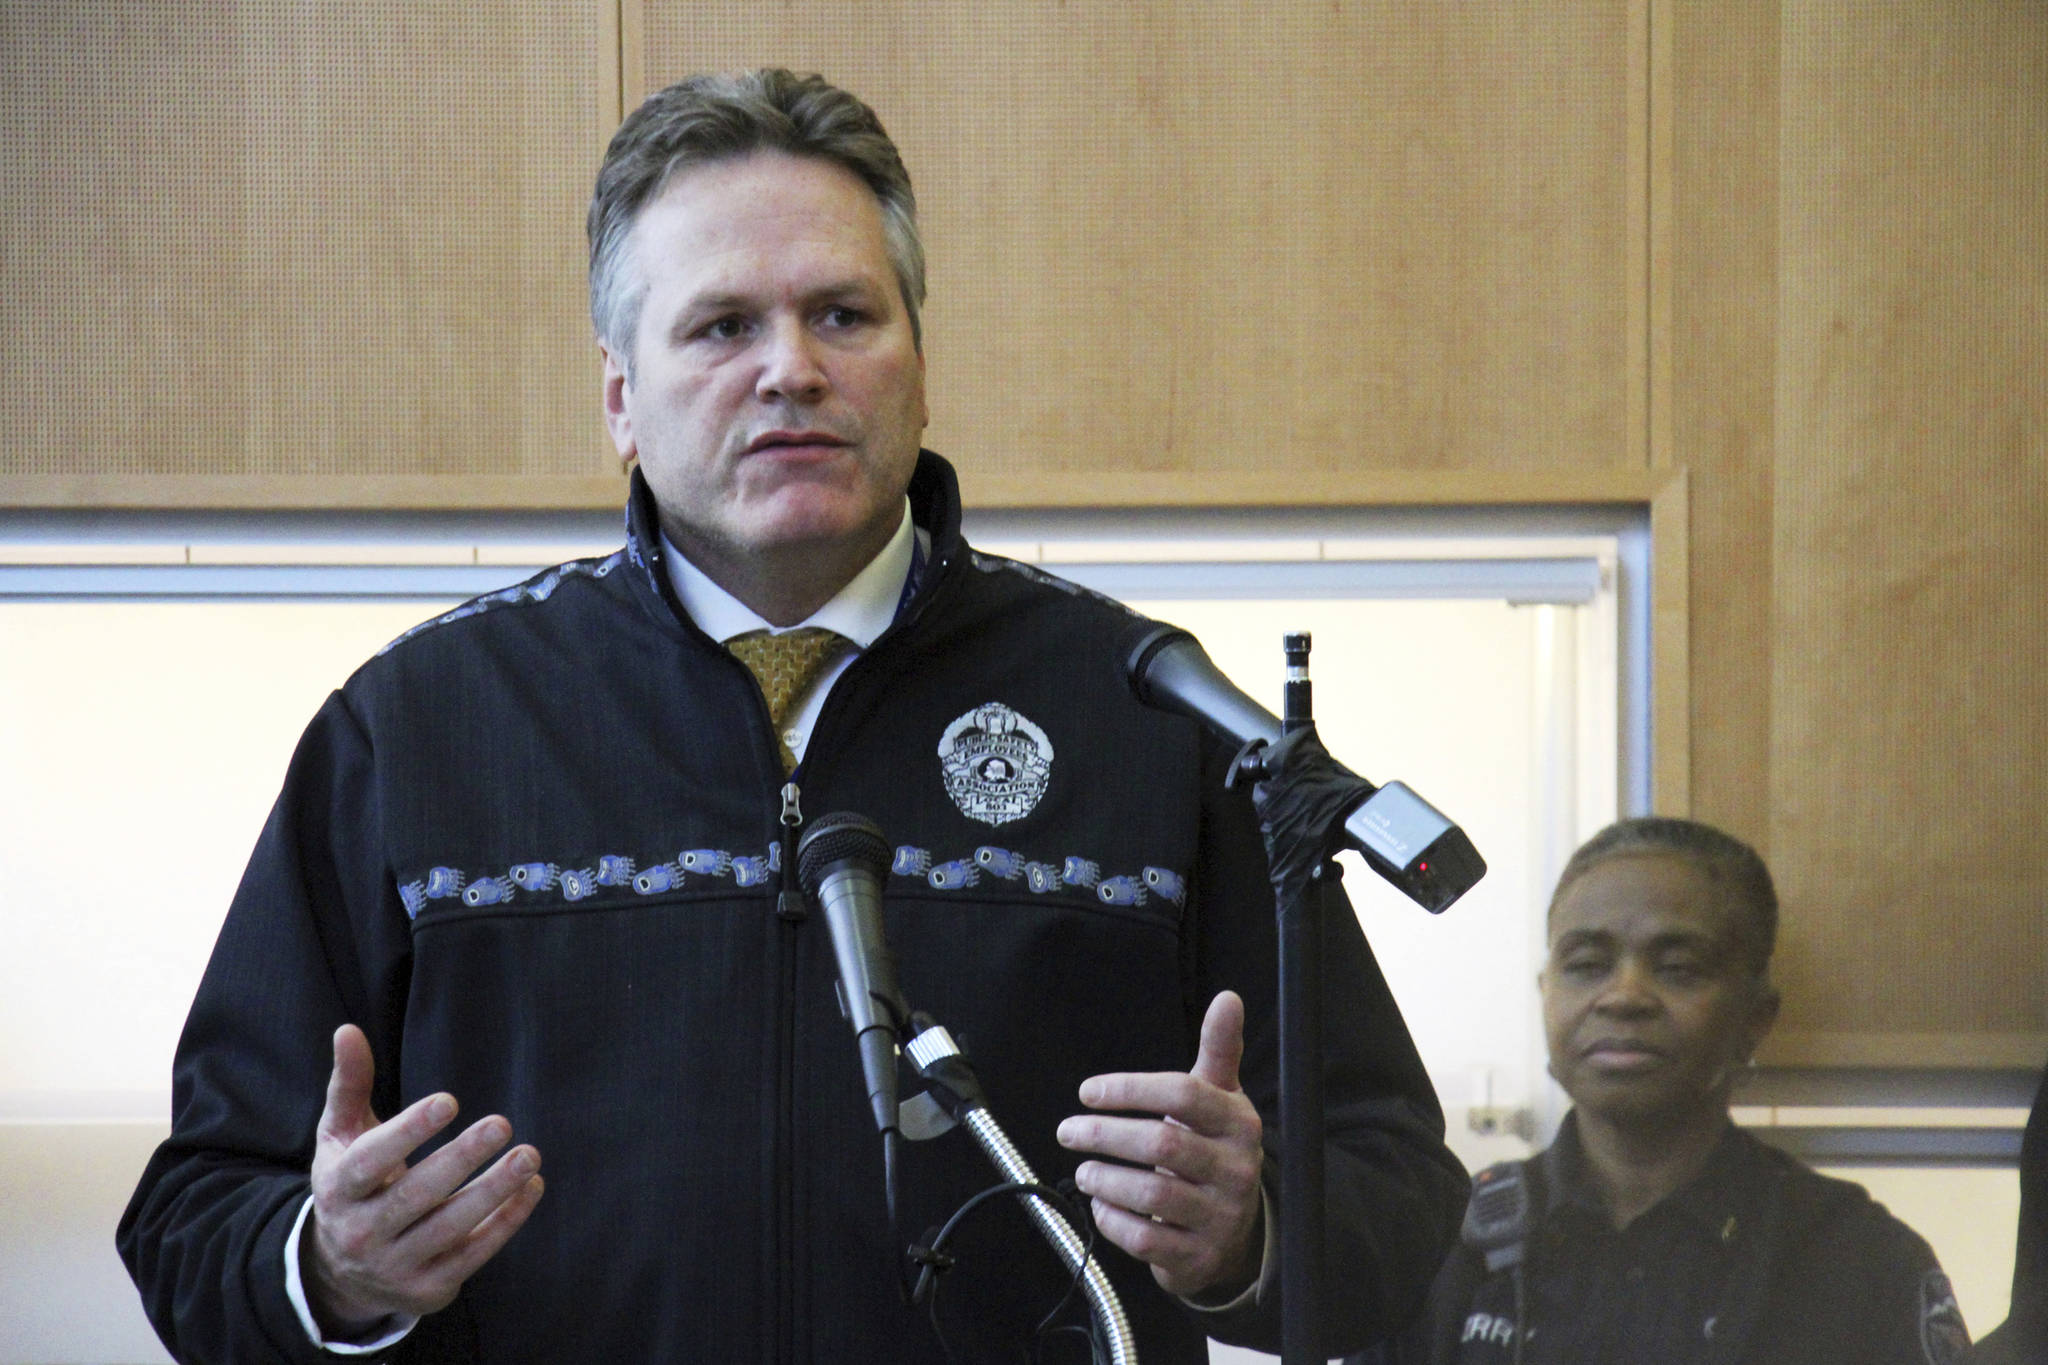 Gov. Mike Dunleavy is shown at a news conference Wednesday, Dec. 5, 2018 in Anchorage. (Mark Thiessen | Associated Press)